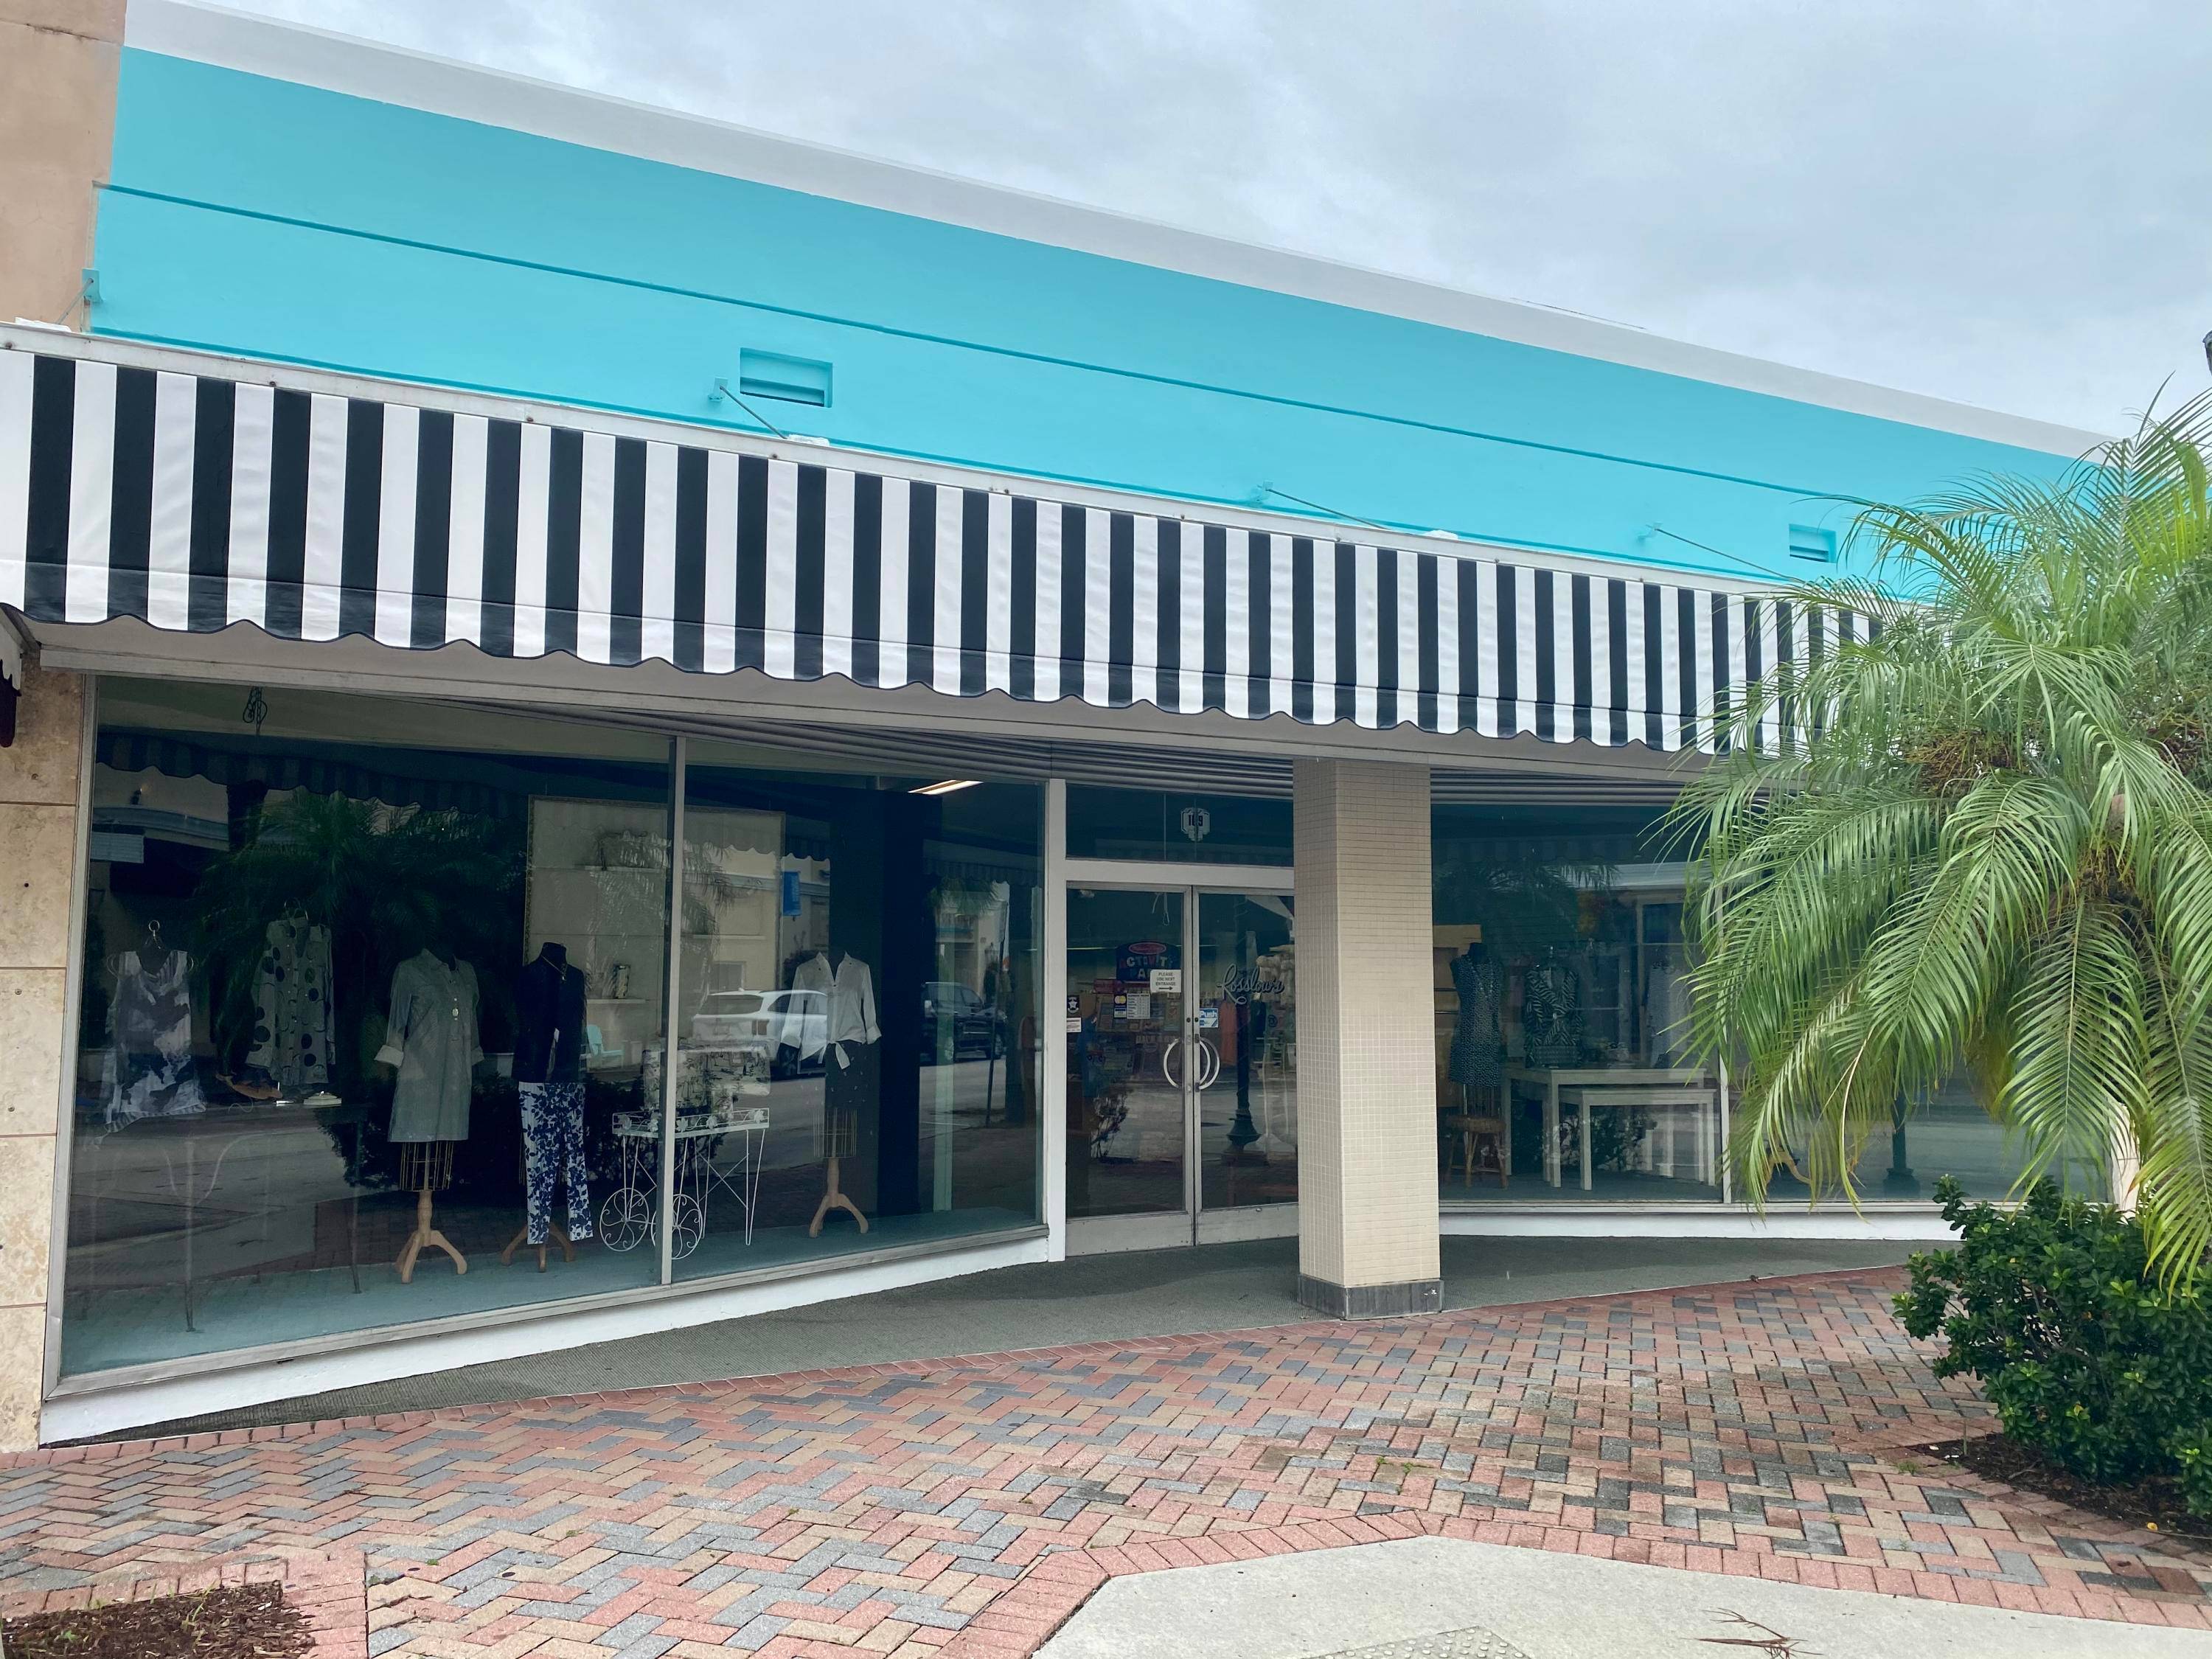 2, 794 Sq feet of Prime retail office space For Lease in The heart of Historic Fort Pierce.